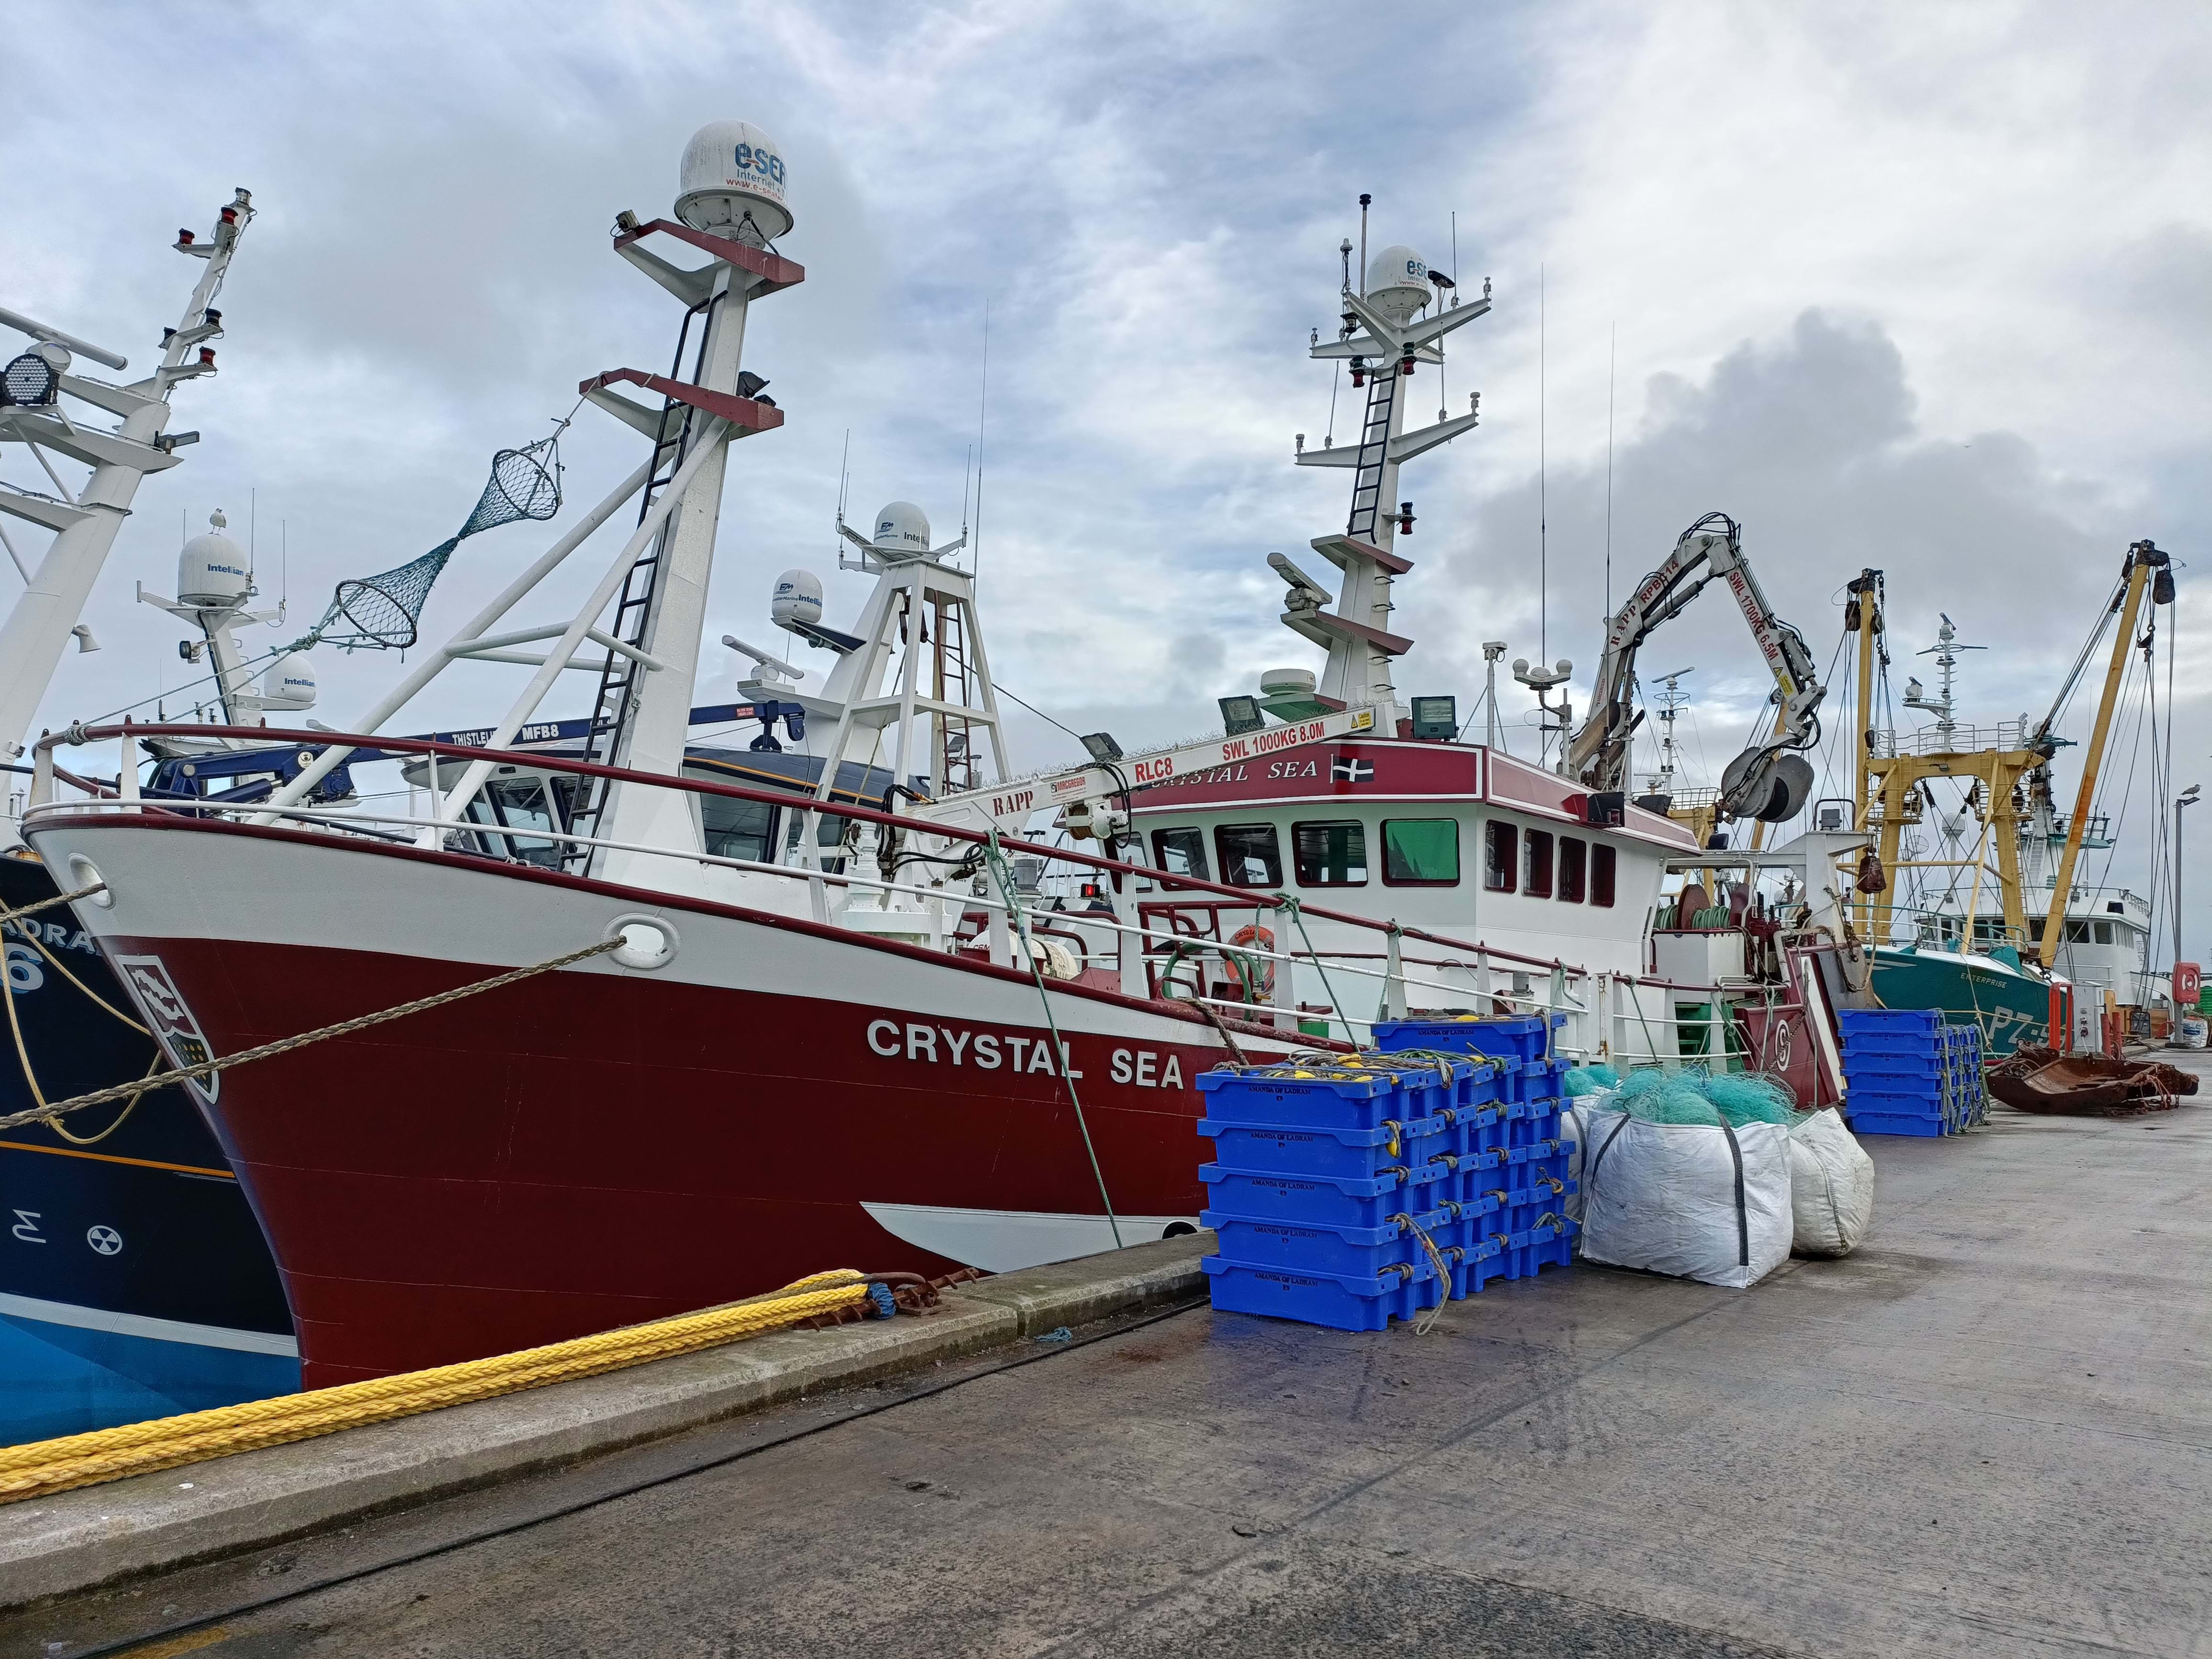 An image of the Crystal Sea trawler in a dock